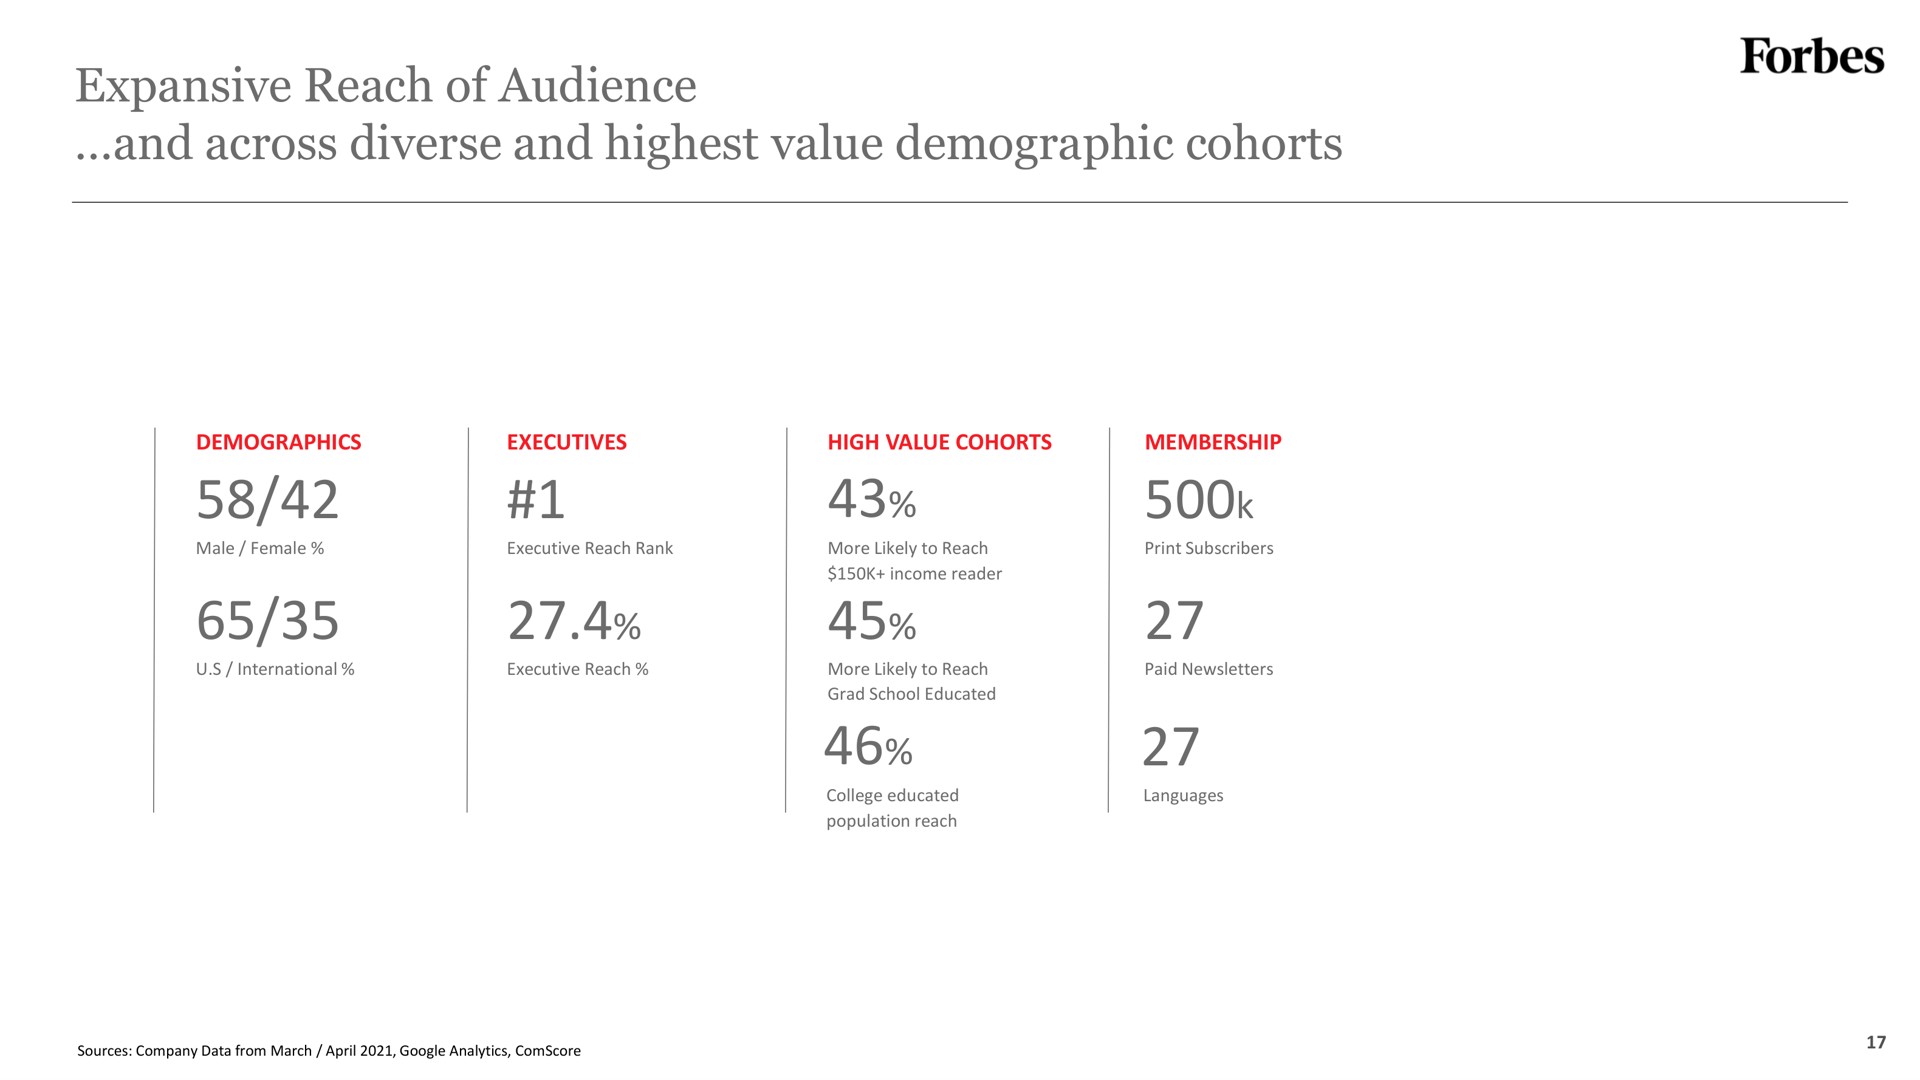 expansive reach of audience and across diverse and highest value demographic cohorts | Forbes